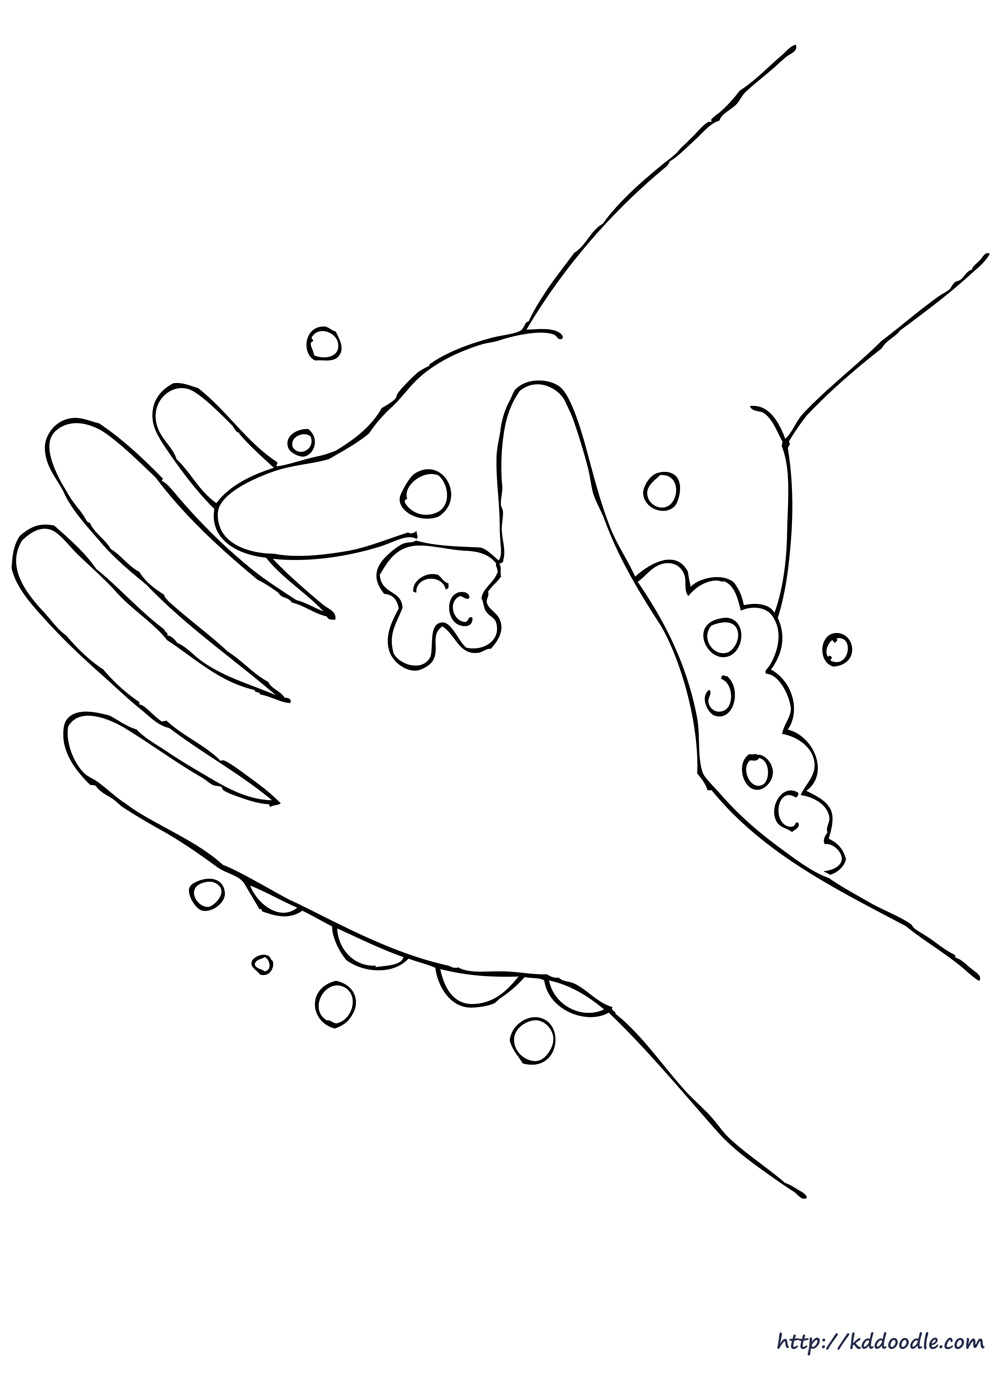 Hand washing free coloring pages of how to wash your hands clip art